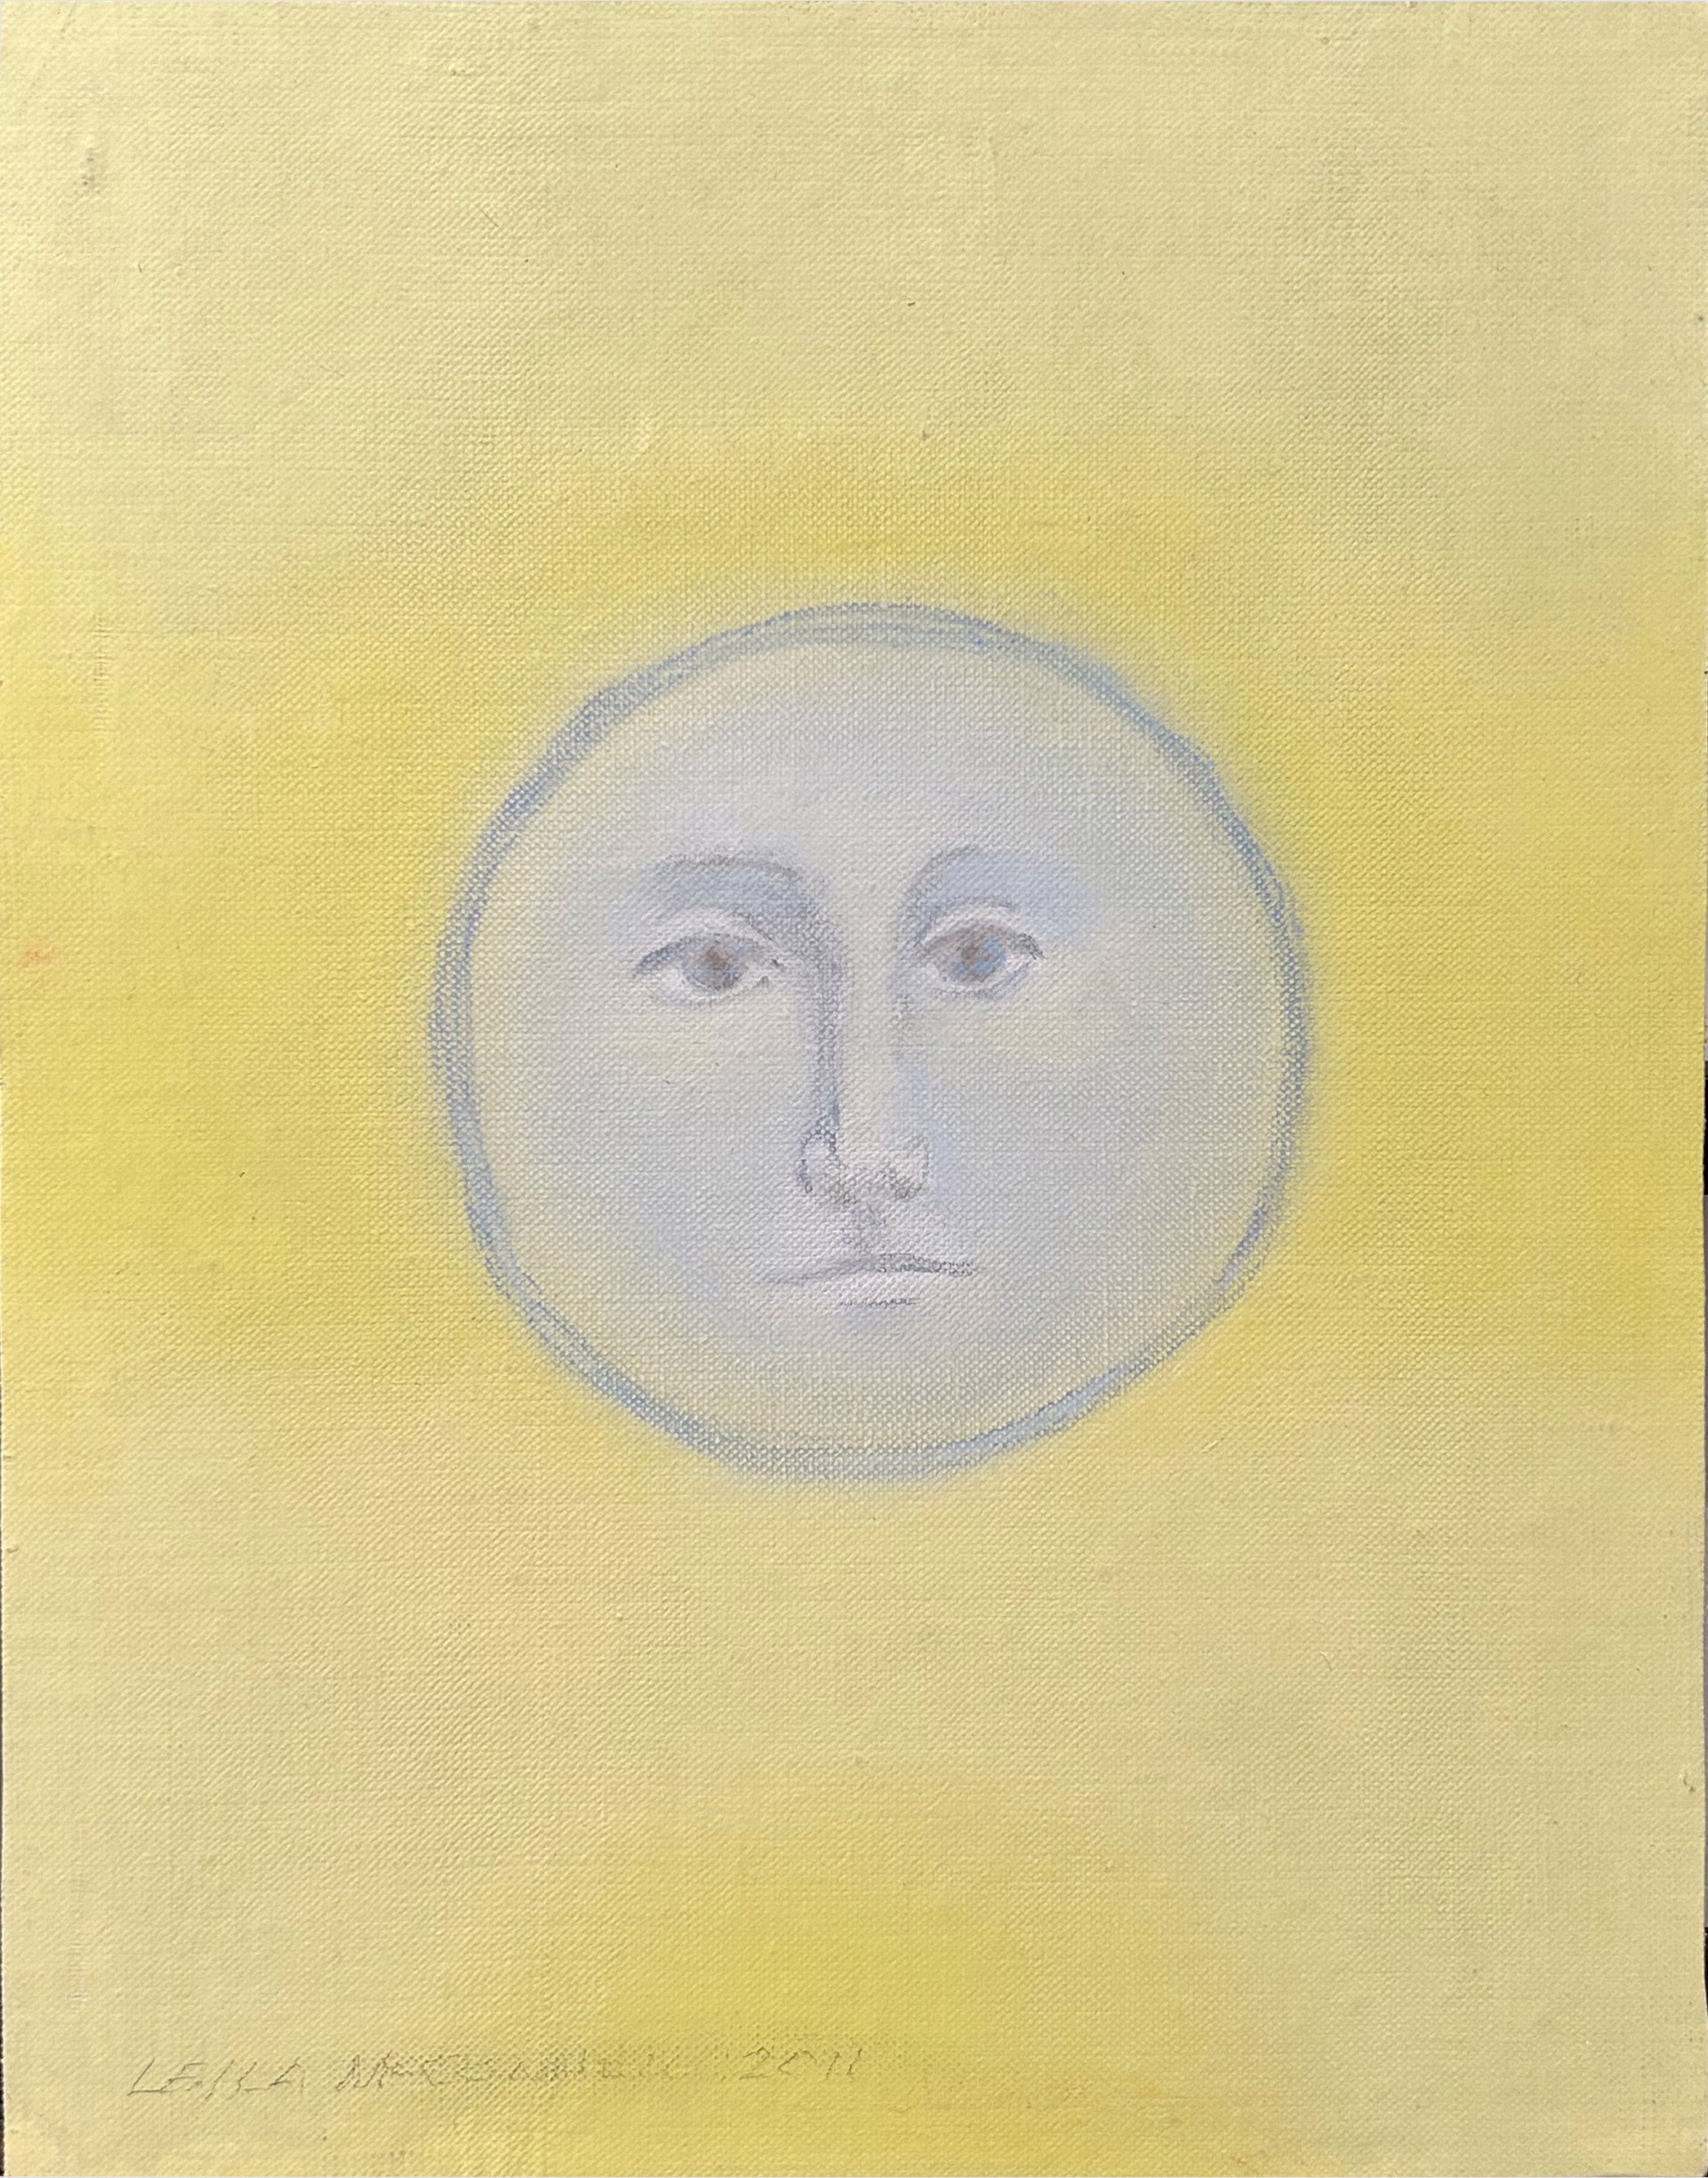 Moonface - light blue gray on yellow by Leila McConnell